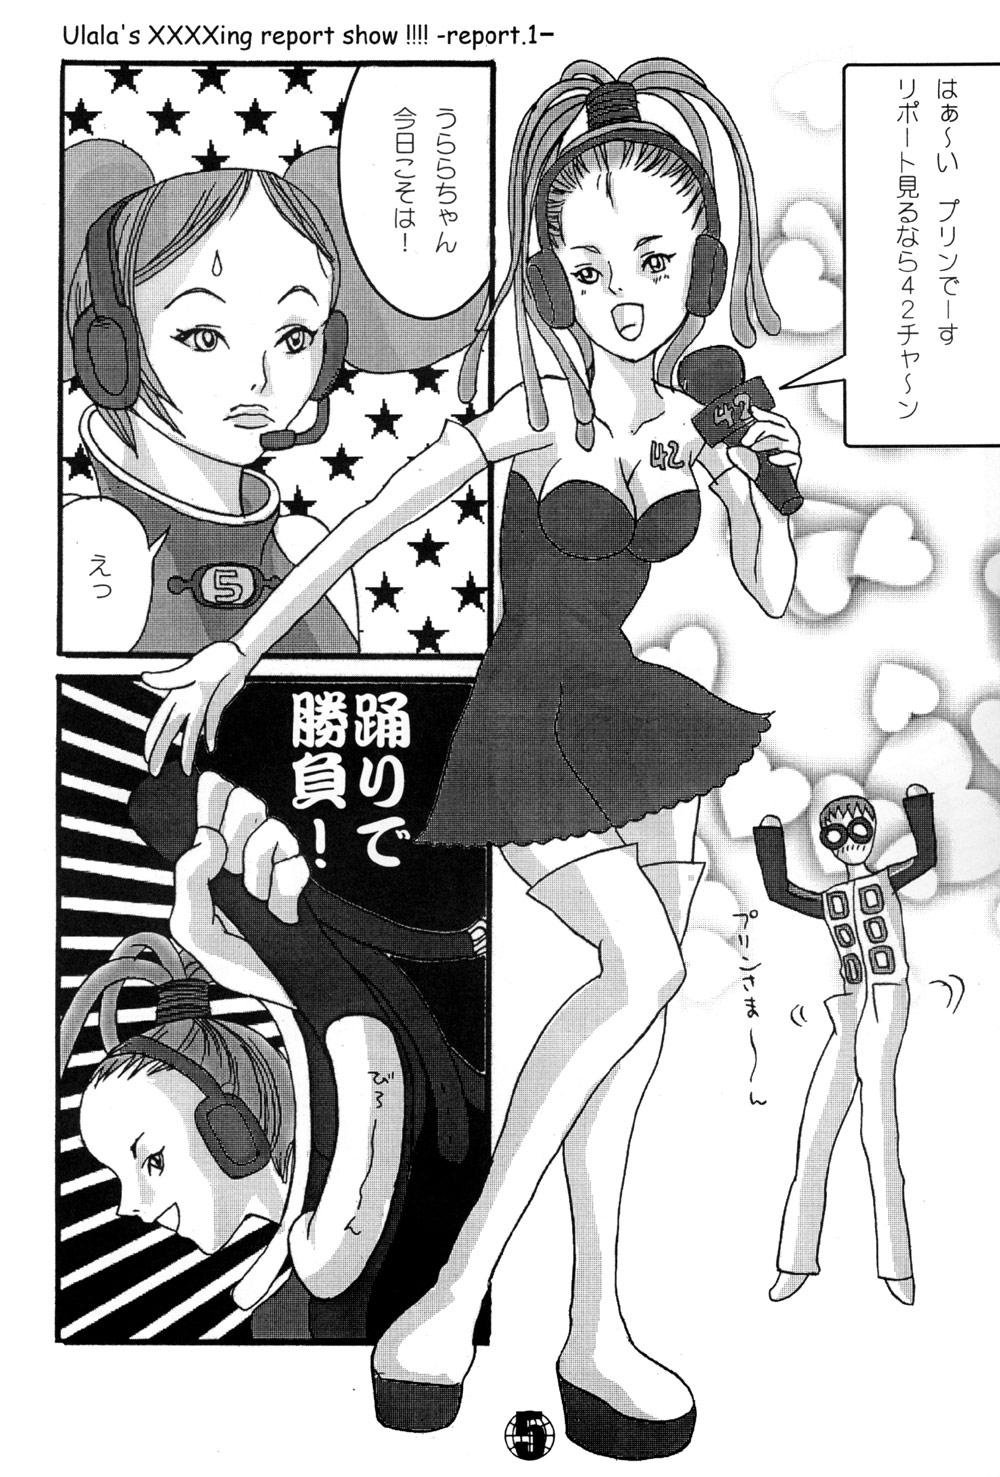 Petite Teenager Ulala's XXXXing Report Show!!!! - Space channel 5 Housewife - Page 5